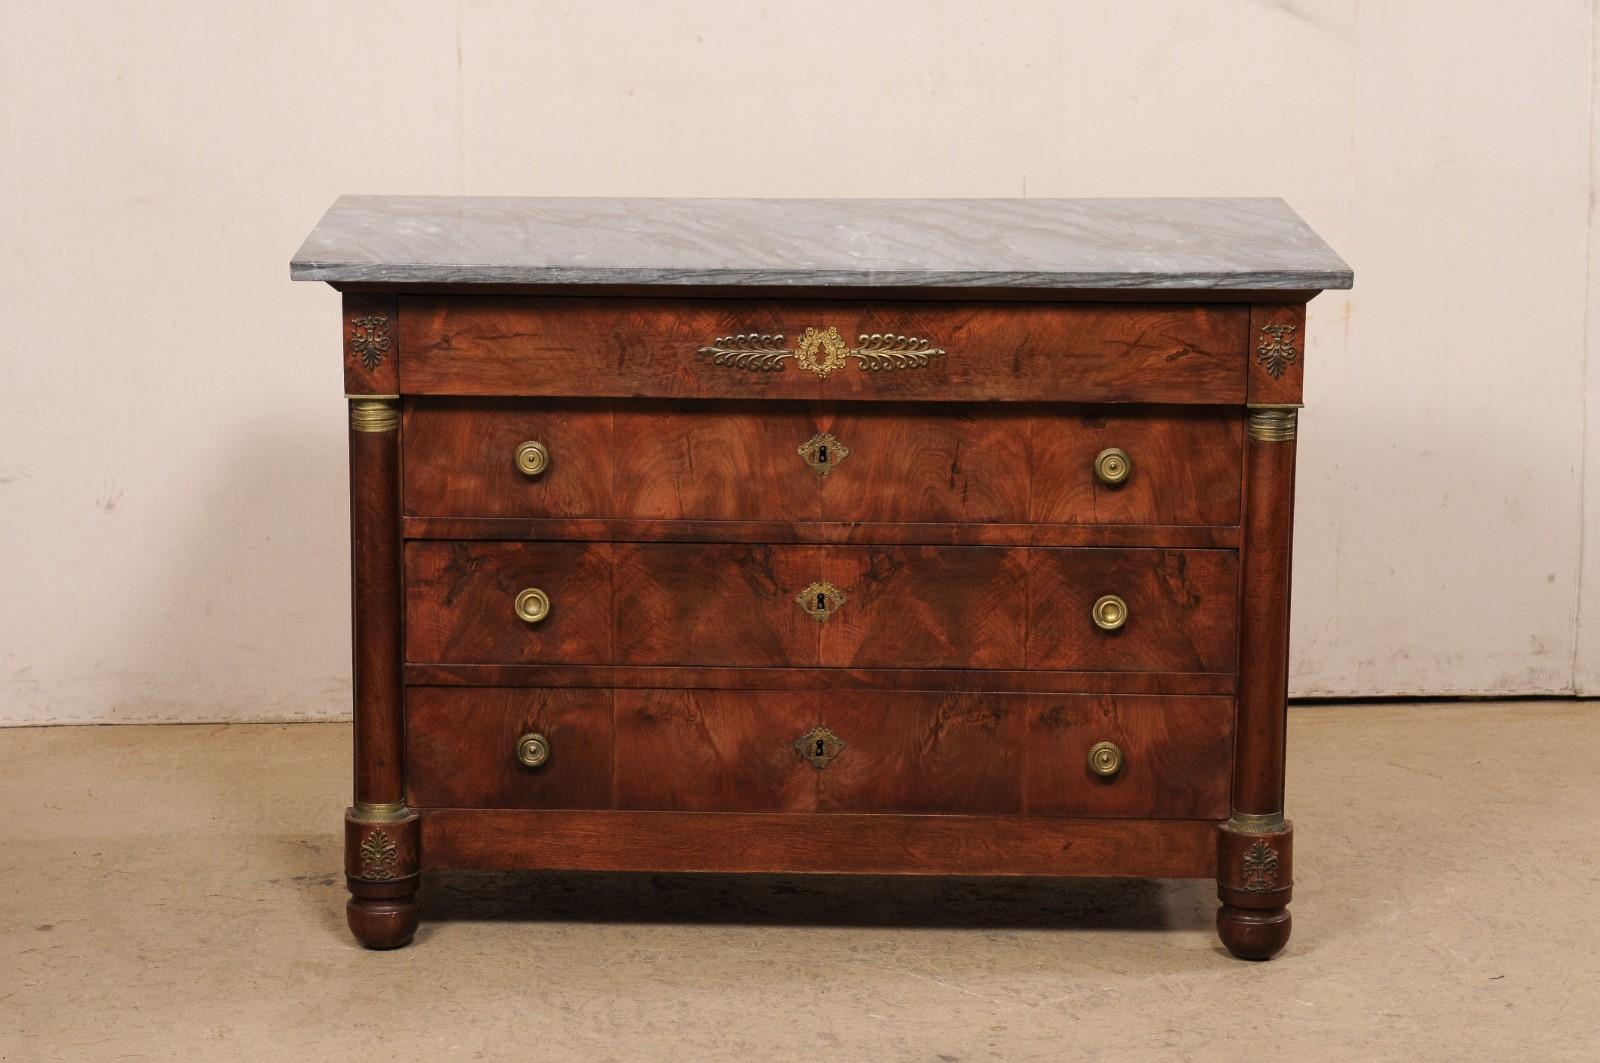 19th Century Neoclassical French Marble-Top Commode W/Exquisite Brass Accents For Sale 8